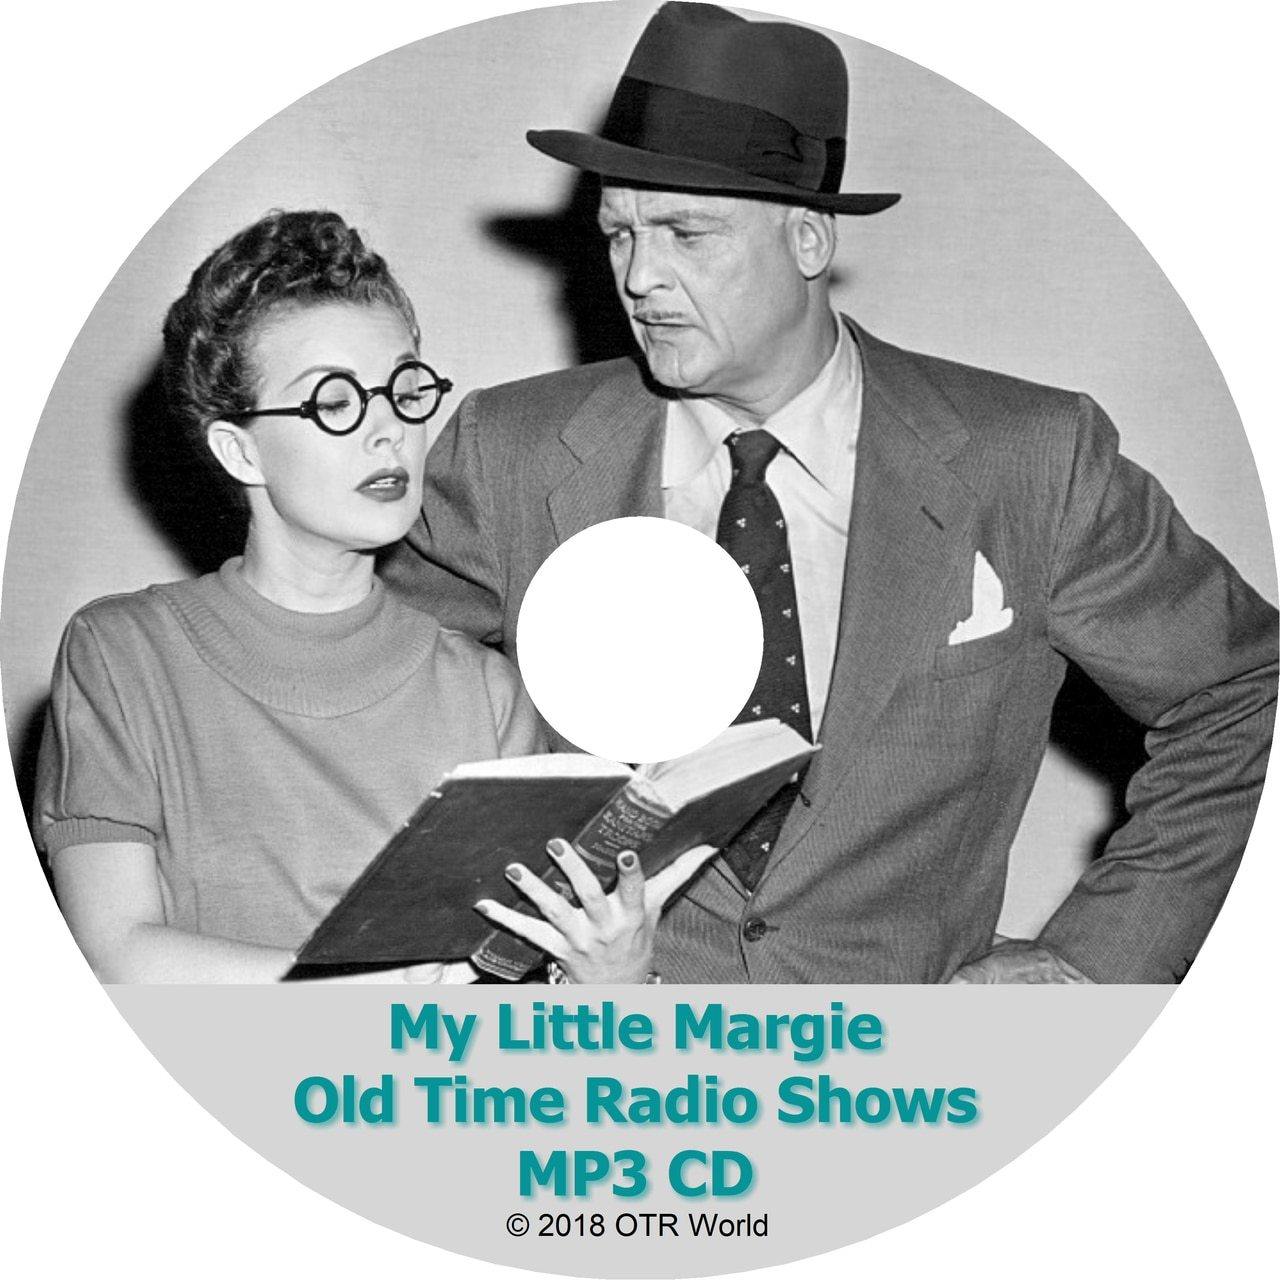 My Little Margie Old Time Radio Shows 35 Episodes On MP3 CD